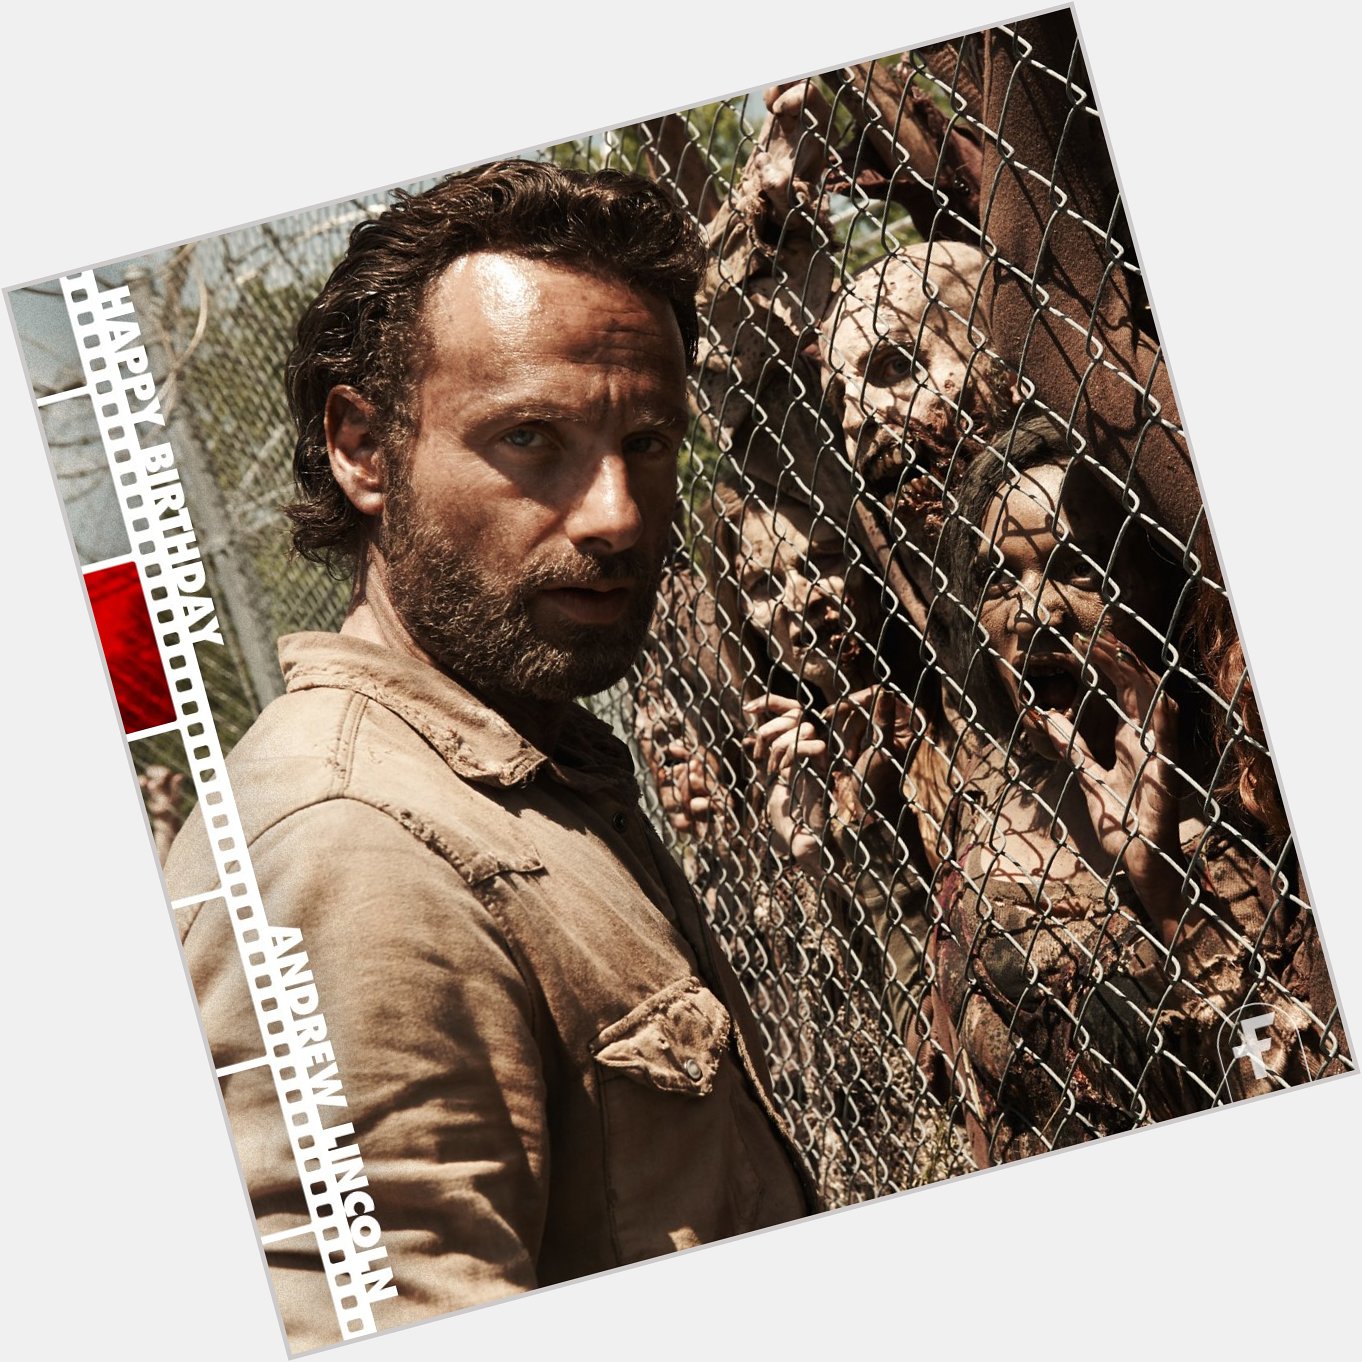 Happy birthday to Rick Grimes himself, Andrew Lincoln! 